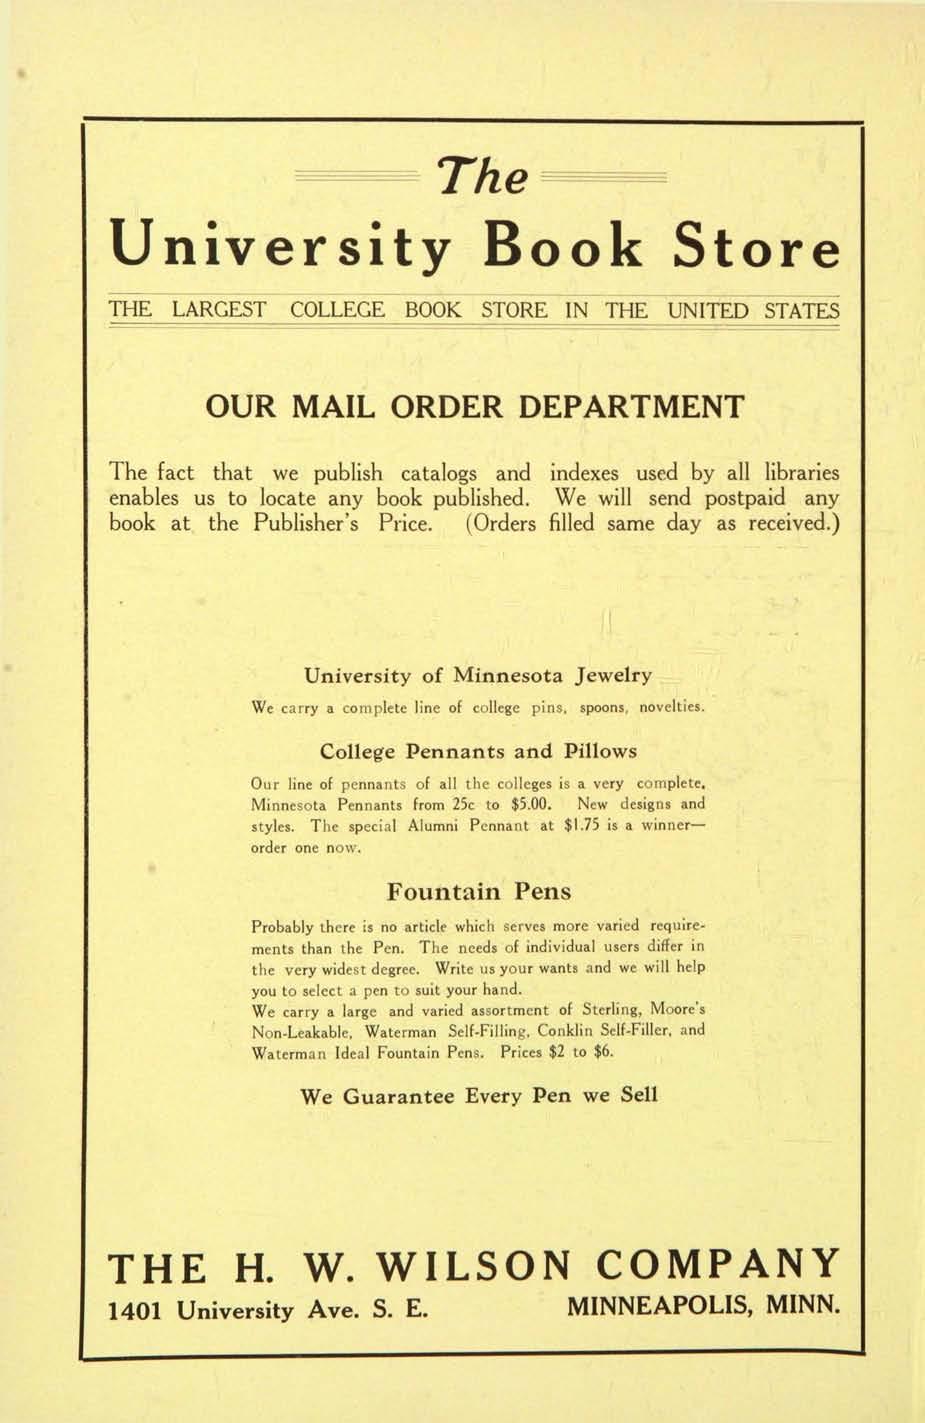 ~~- The ===--===-===== University Book Store THE LARGEST COLLEGE BOOK STORE IN THE UNITED STATES OUR MAIL ORDER DEPARTMENT The fact that we publish catalogs and enables us to locate any book